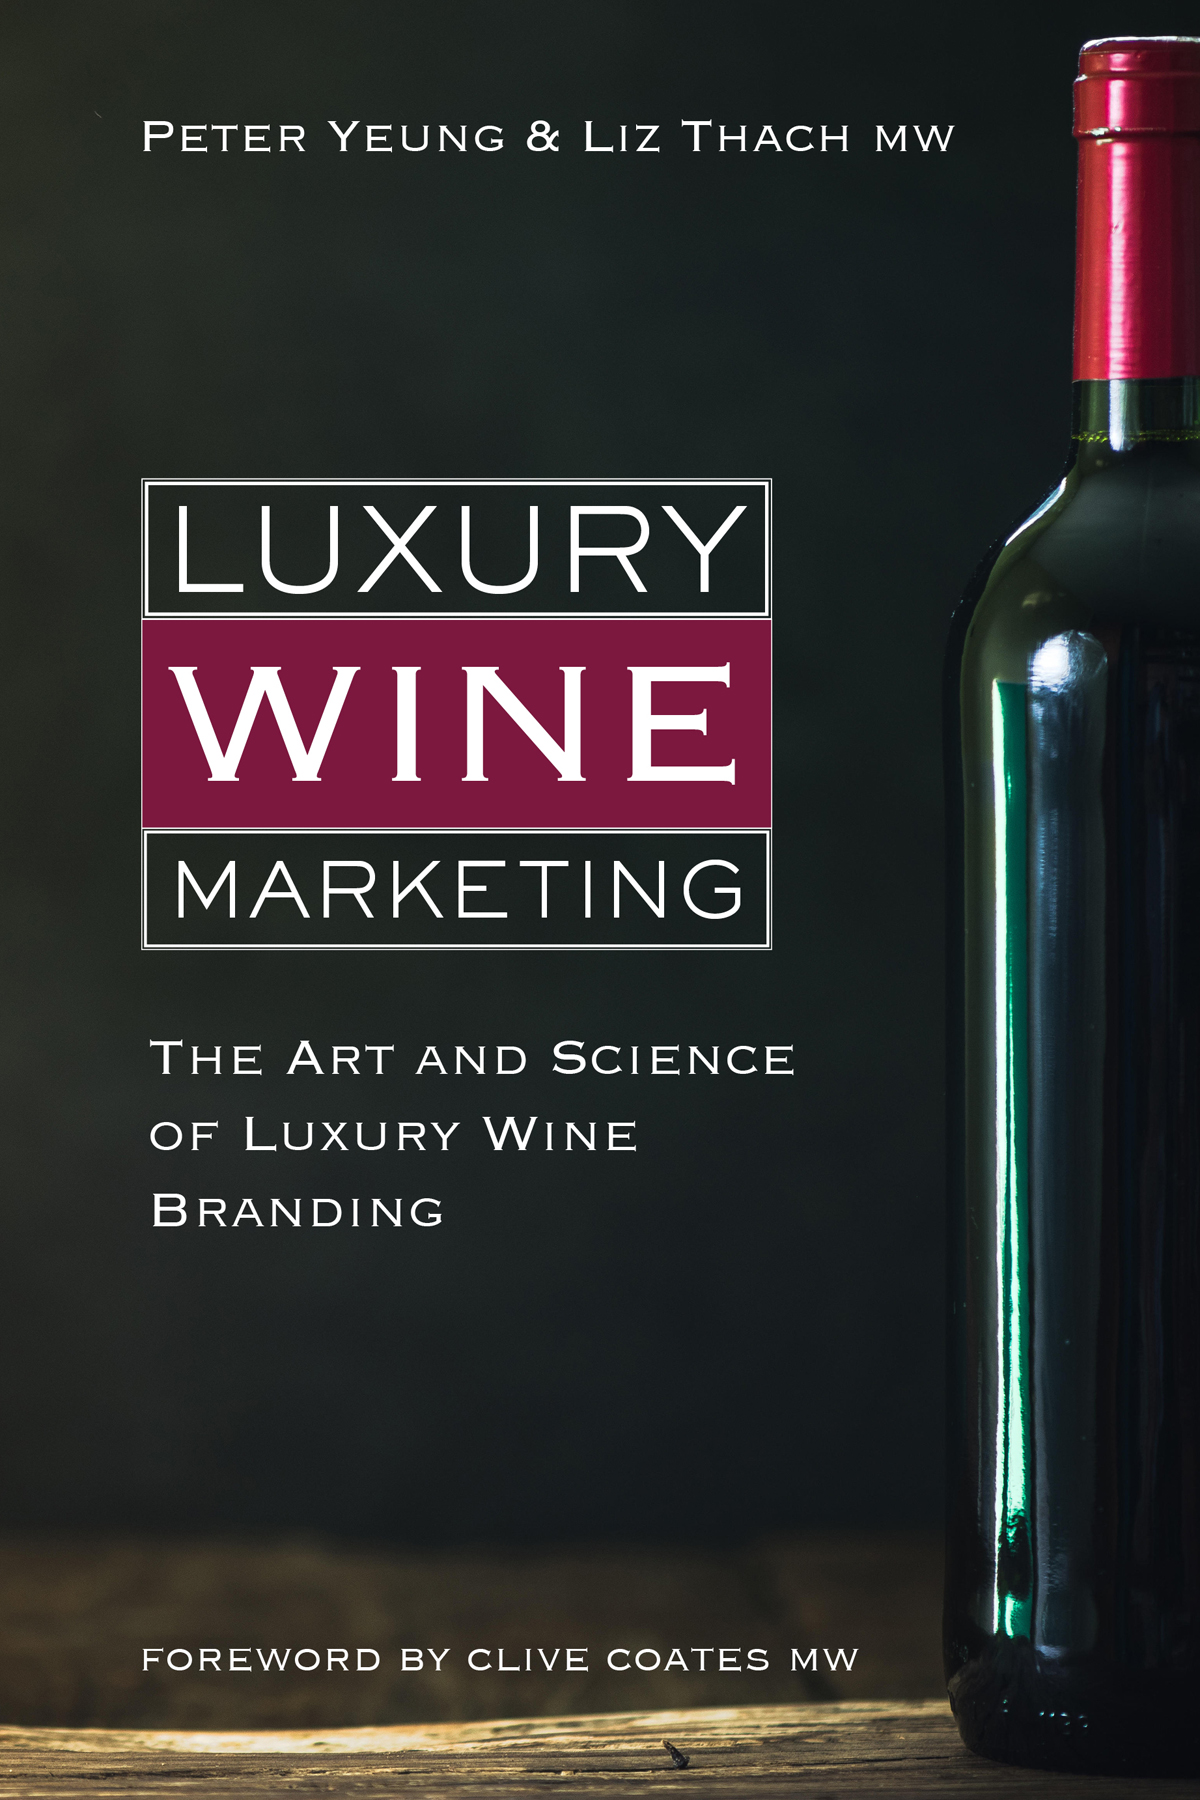 Extract: Luxury Wine Marketing by Peter Yeung and Liz Thach MW